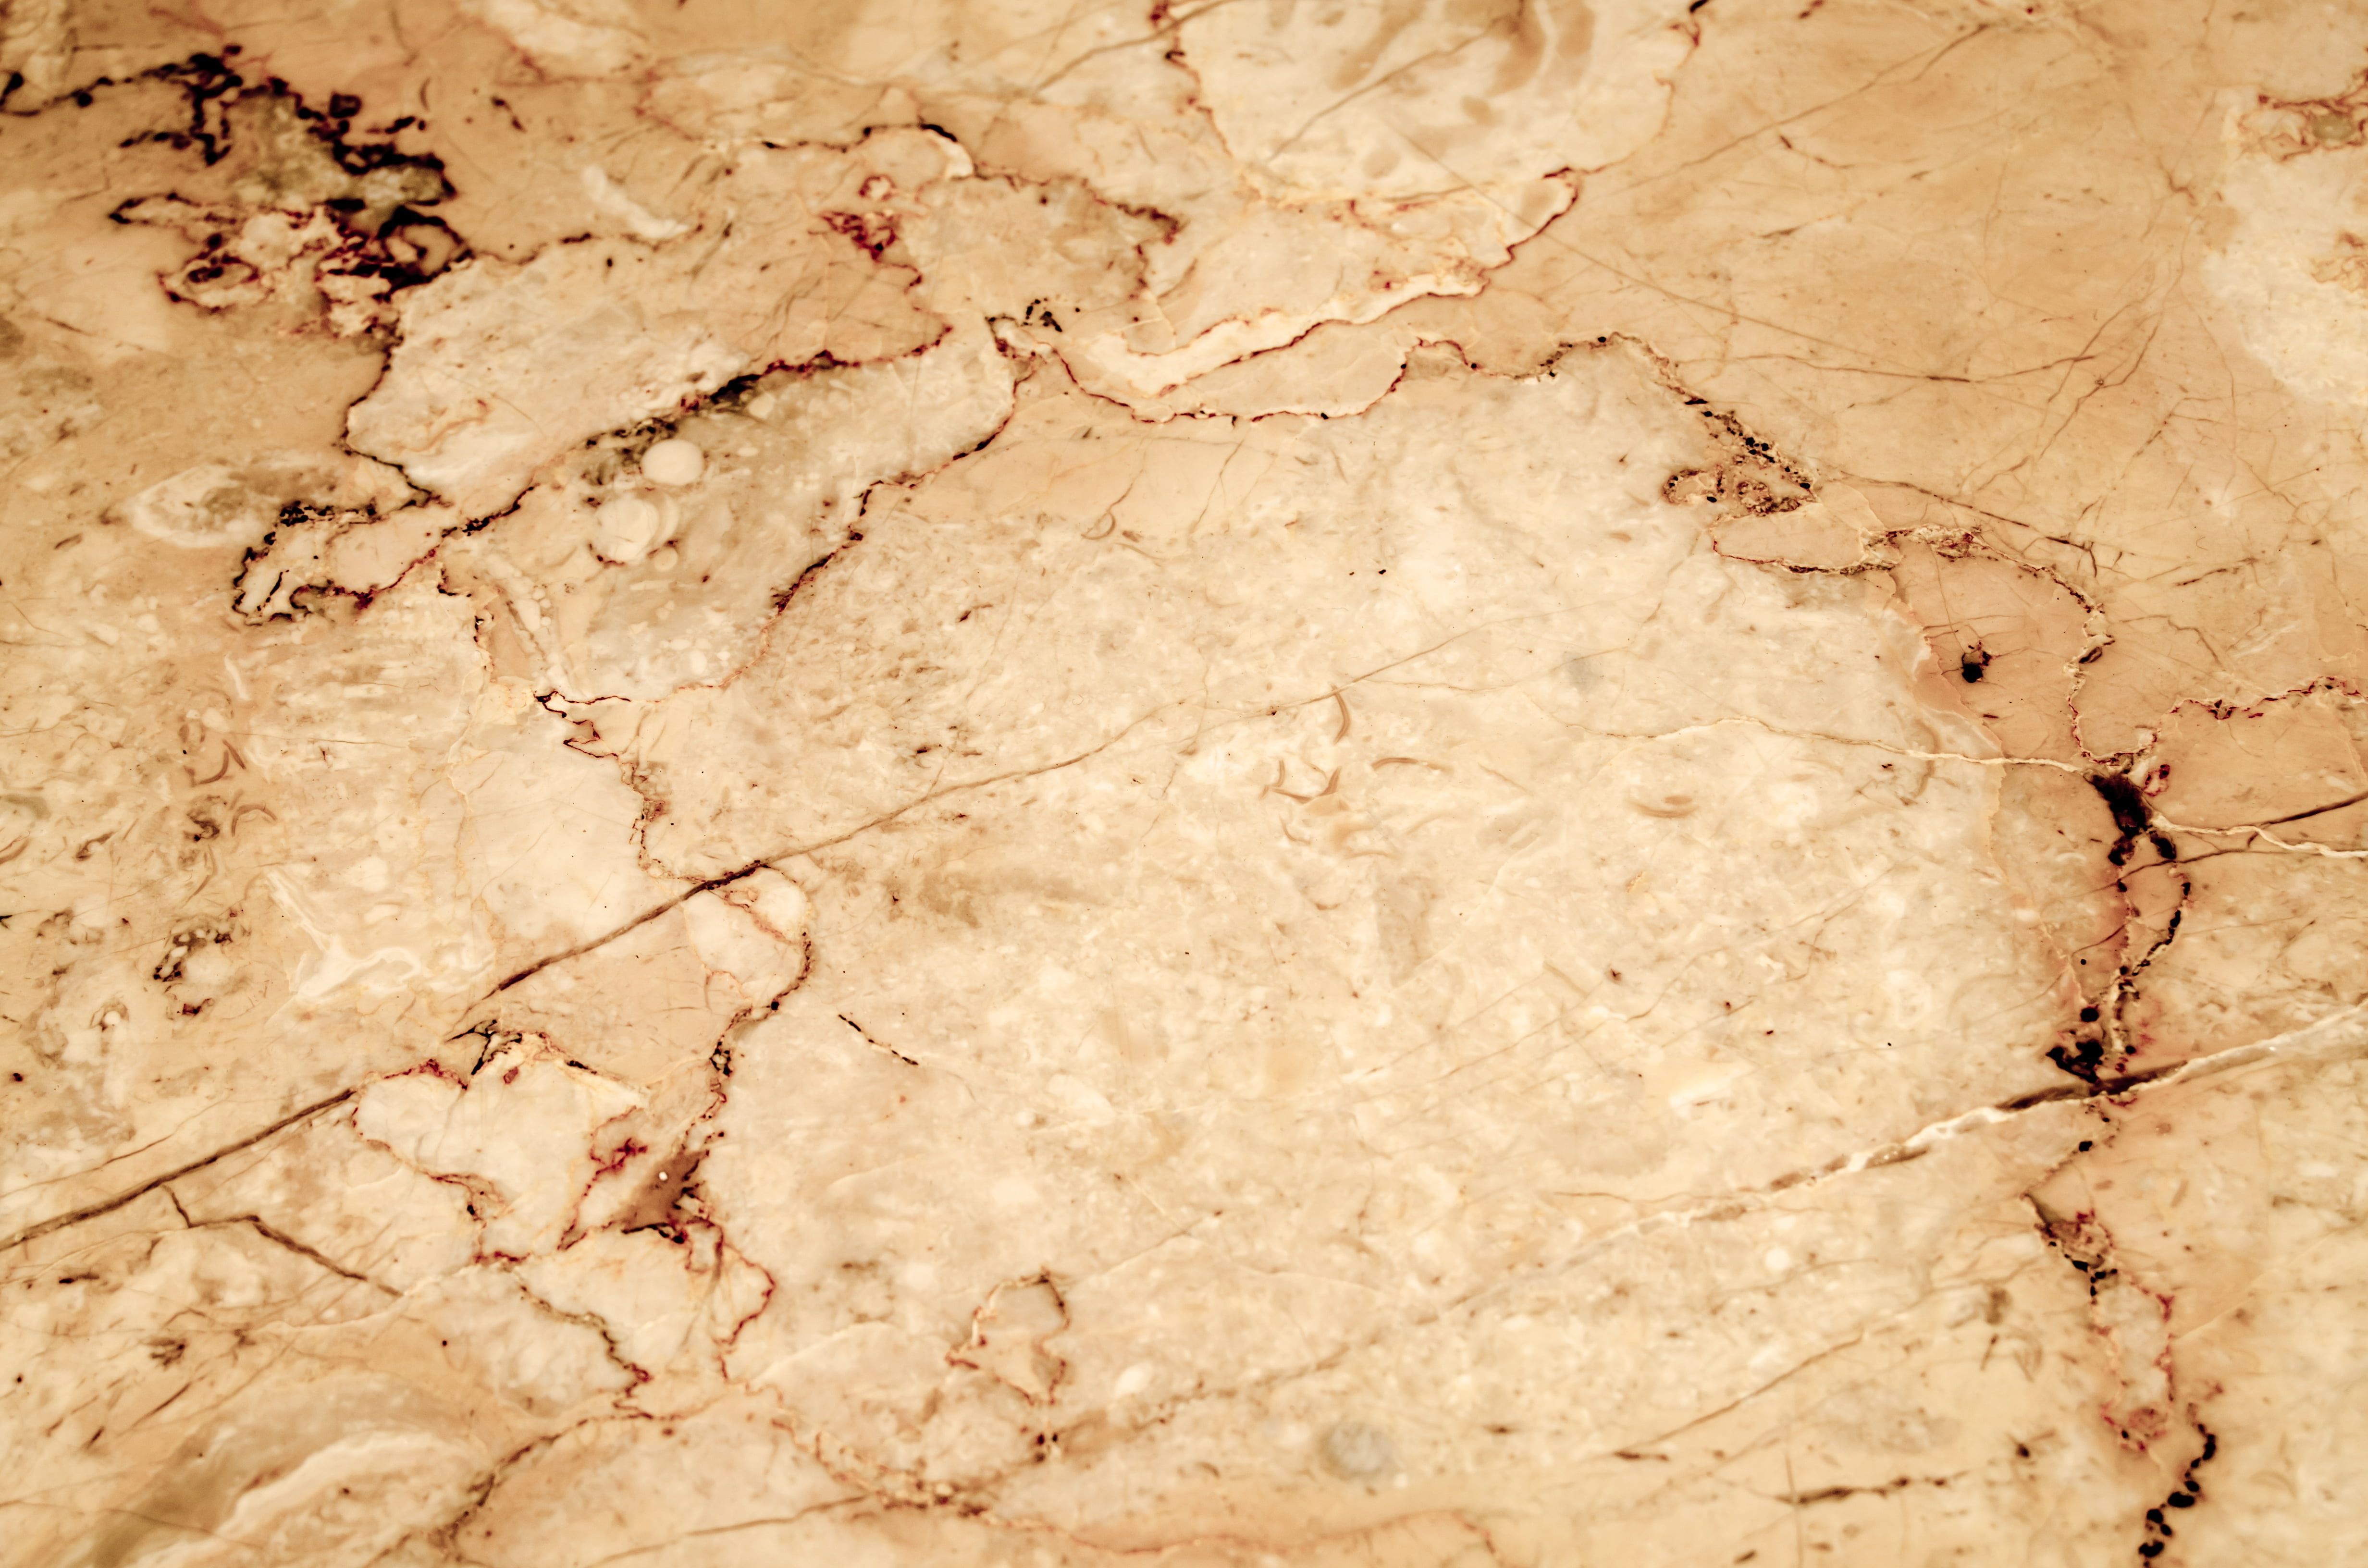 brown marble #marble #texture K #wallpaper #hdwallpaper #desktop. Marble wallpaper, Marble texture, Marble background iphone